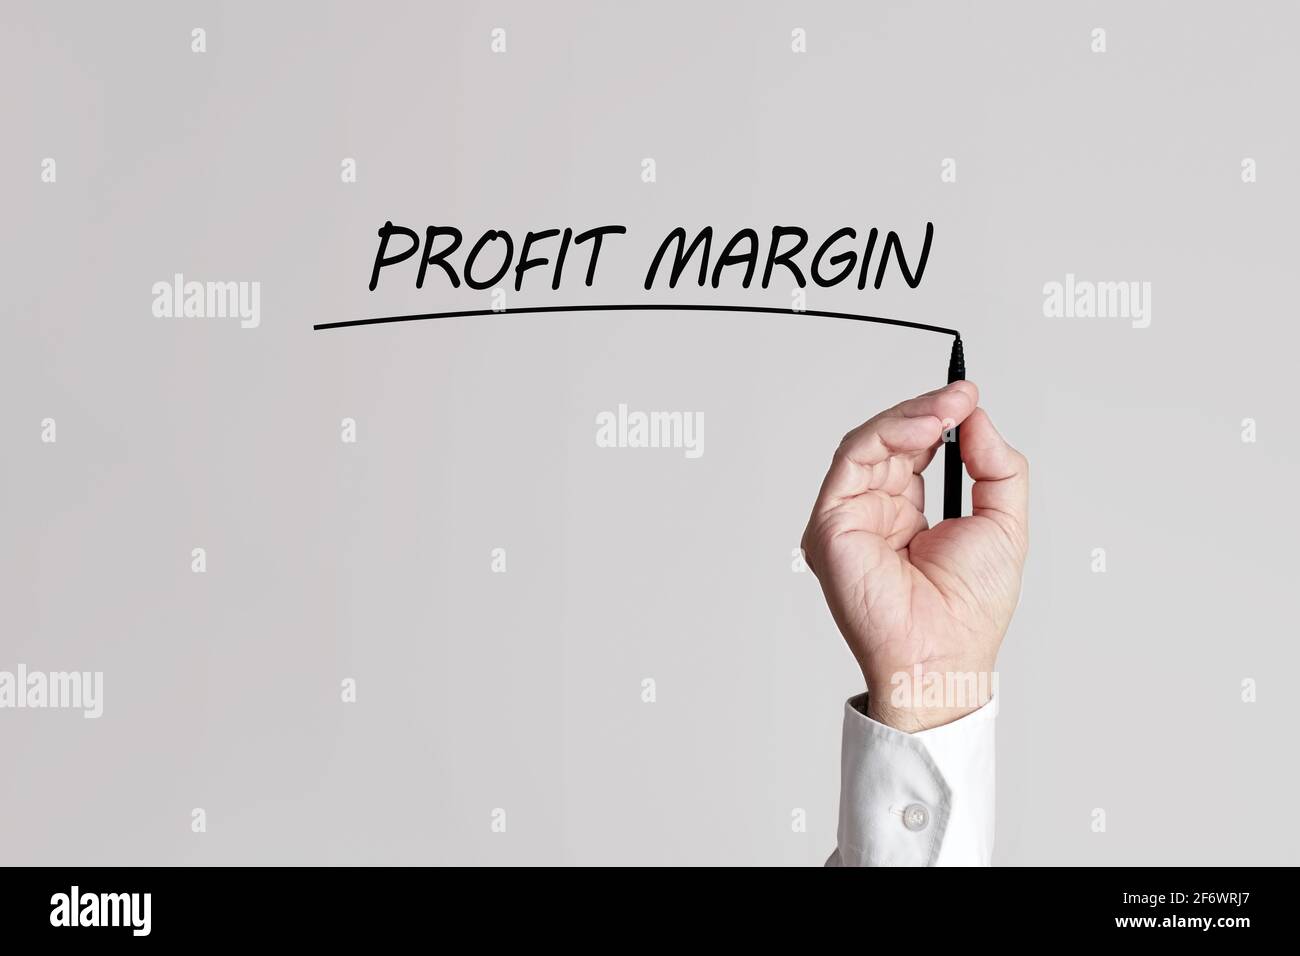 Businessman hand with pen underlines the words profit margin on a gray background virtual screen. Stock Photo